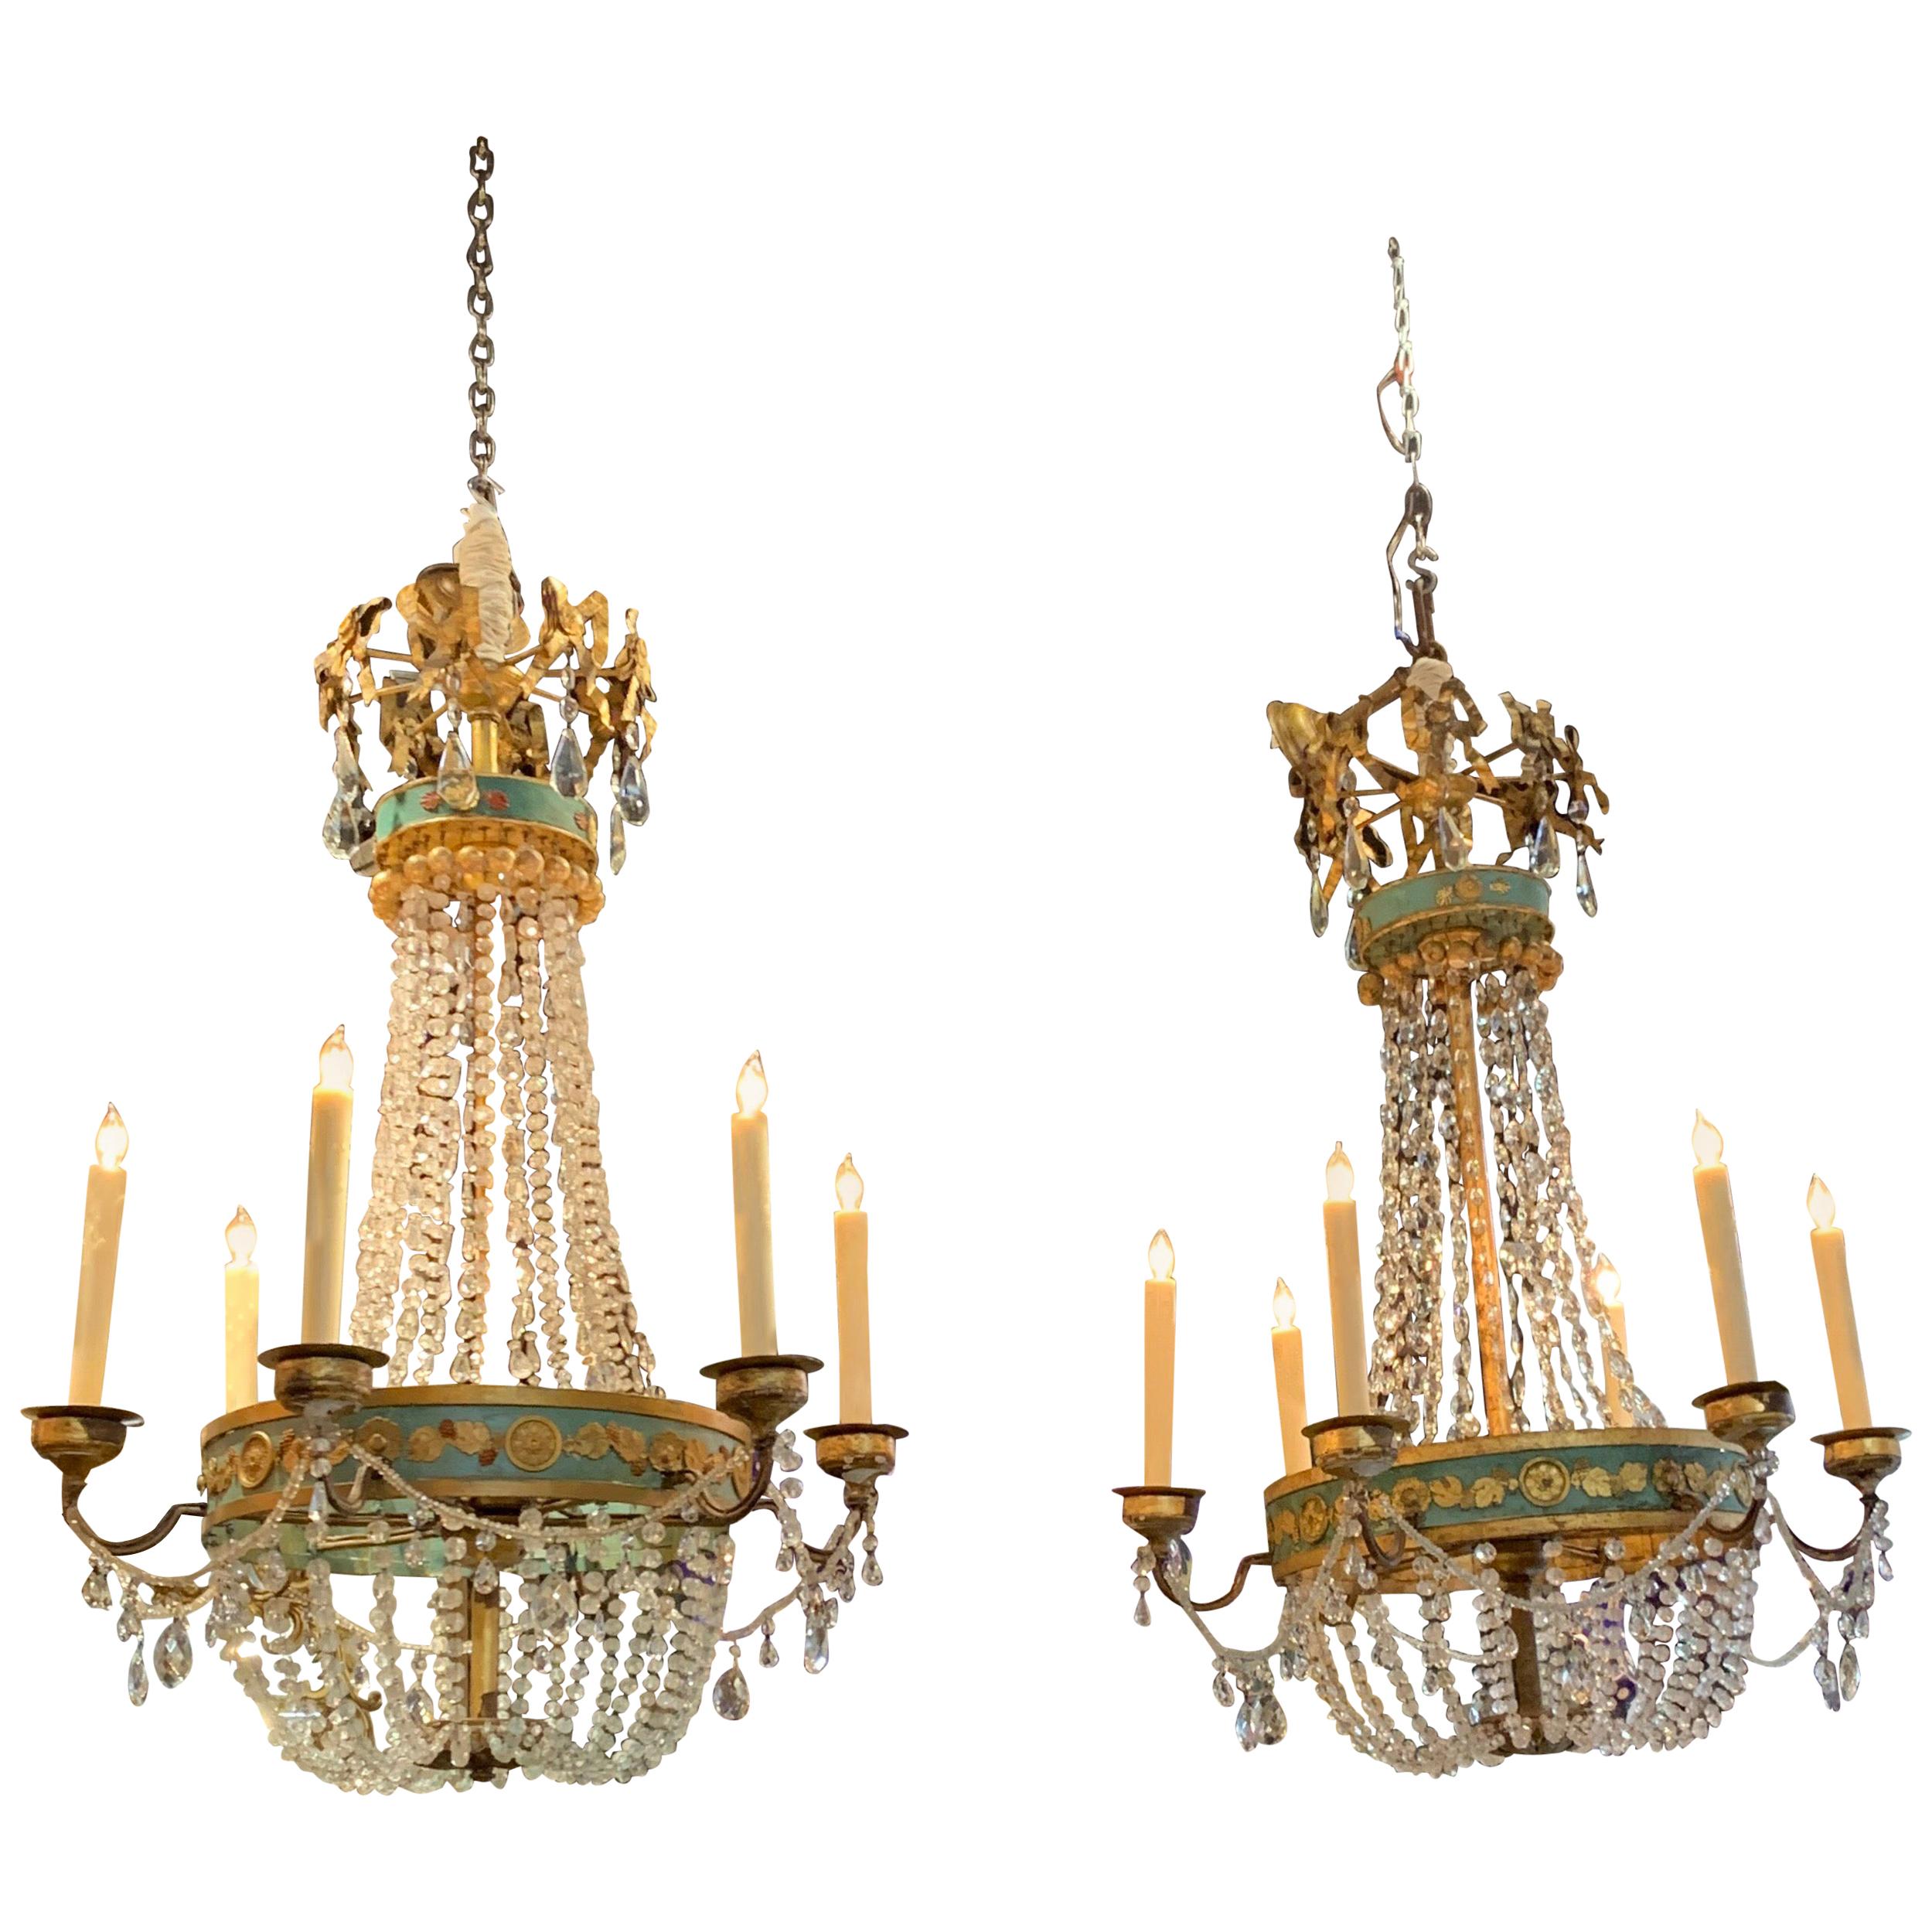 Pair of 18th Century Italian Neoclassical Crystal and Painted Tole Chandeliers